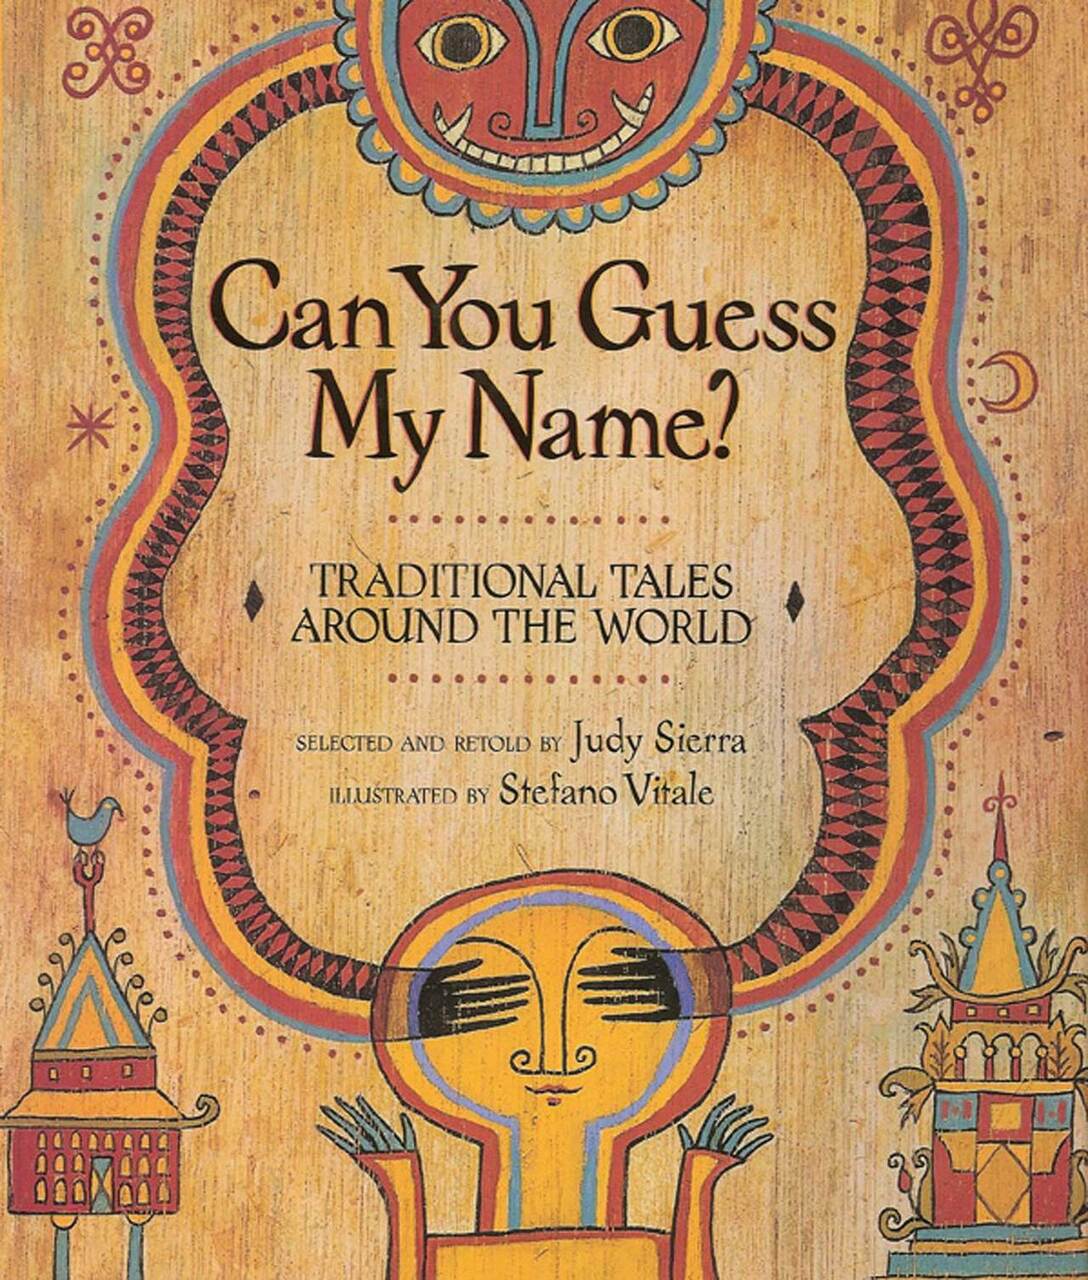 Can You Guess My Name? Traditional Tales Around the World